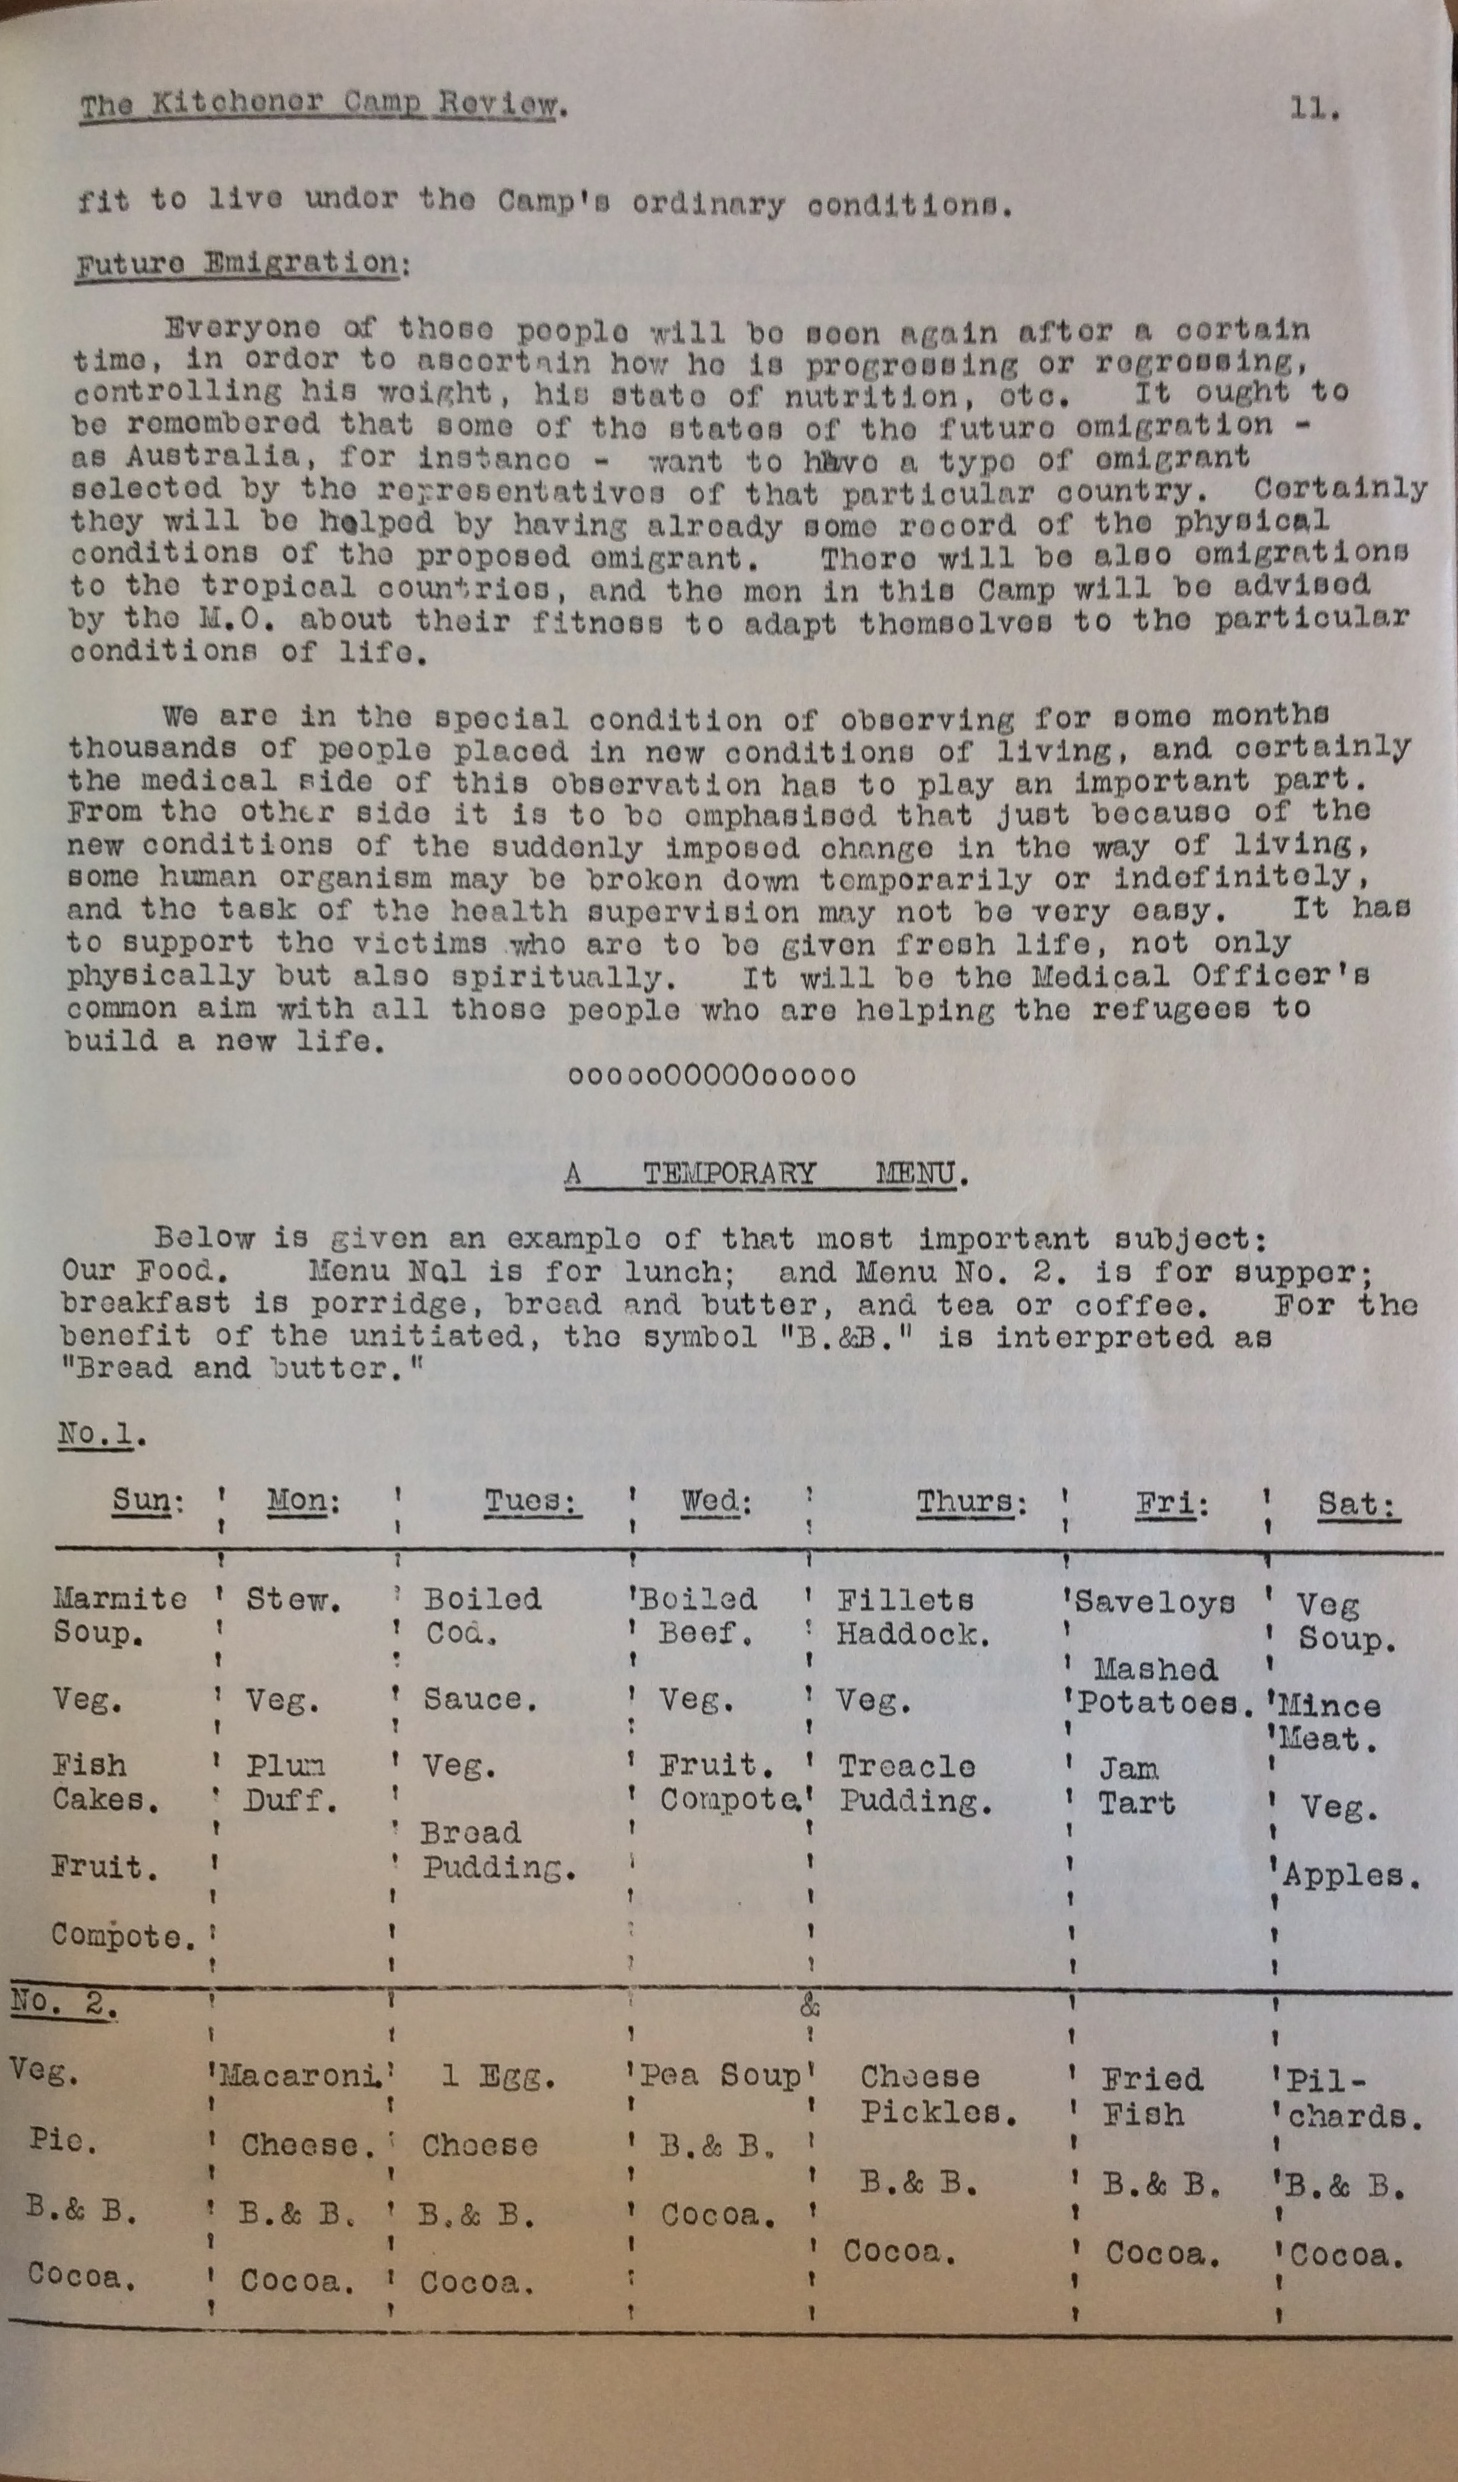 Kitchener Camp Review, No. 1, March 1939, page 11